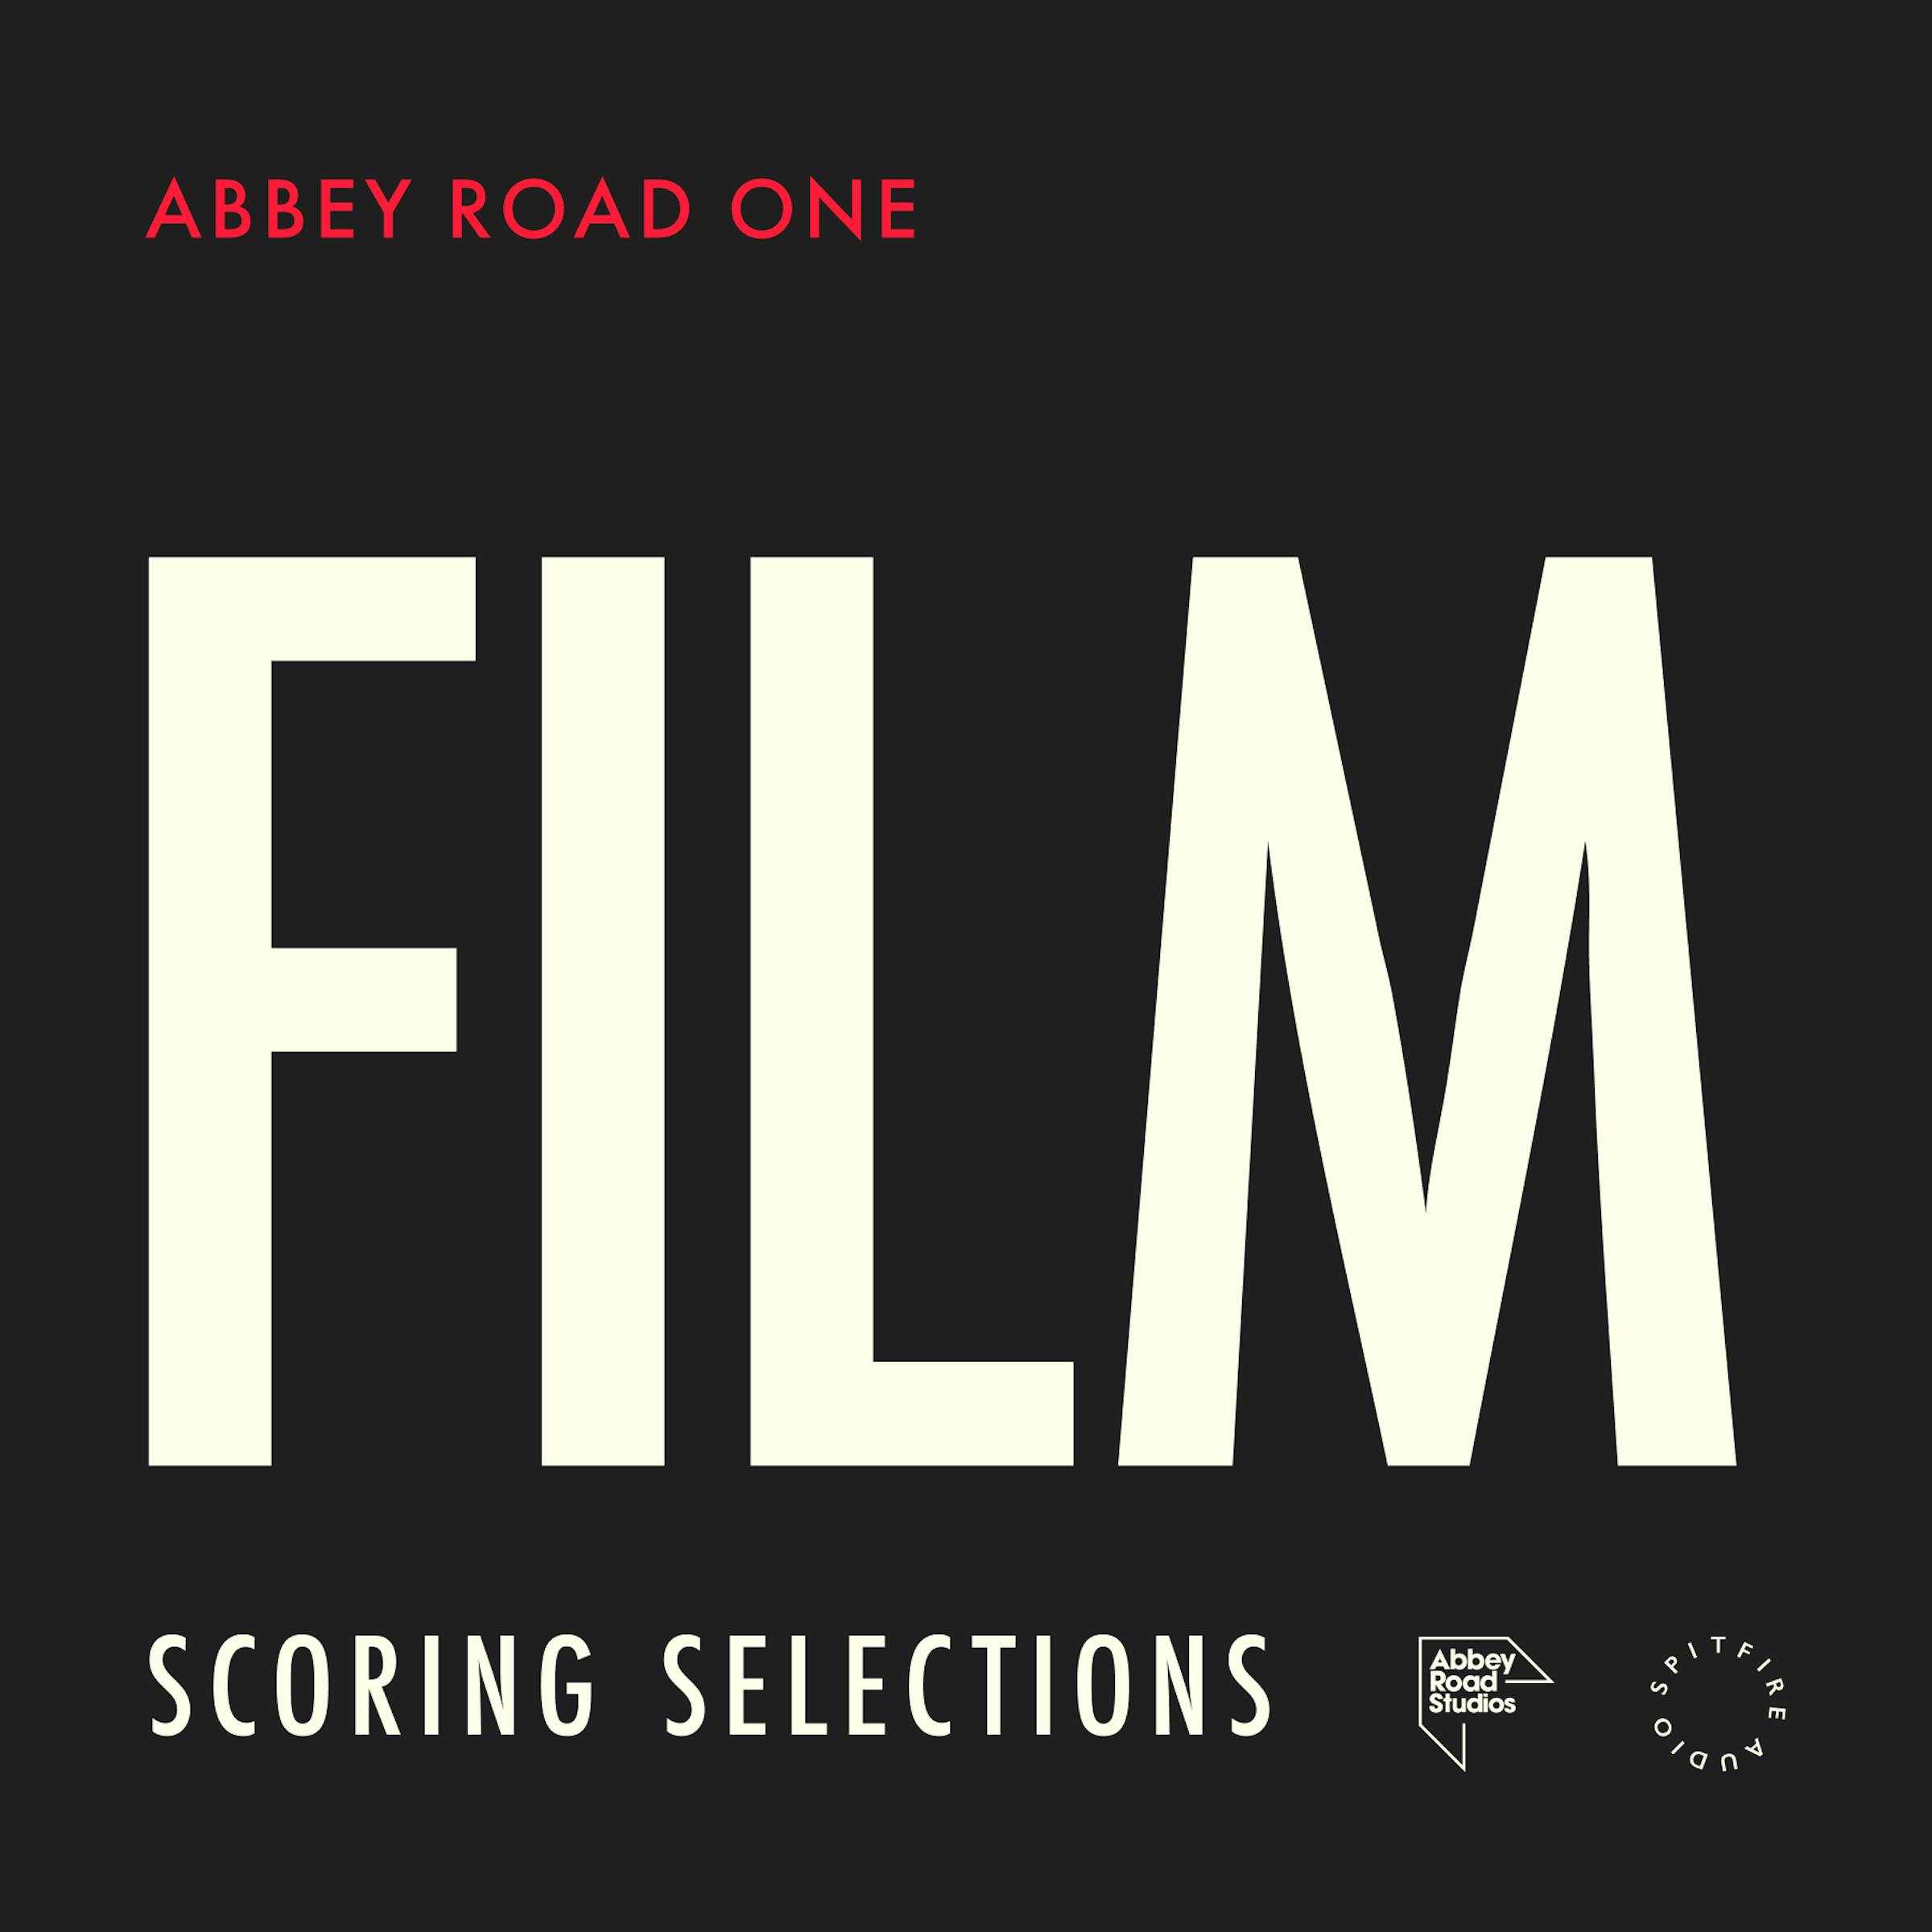 Abbey Road One Film Scoring Selections